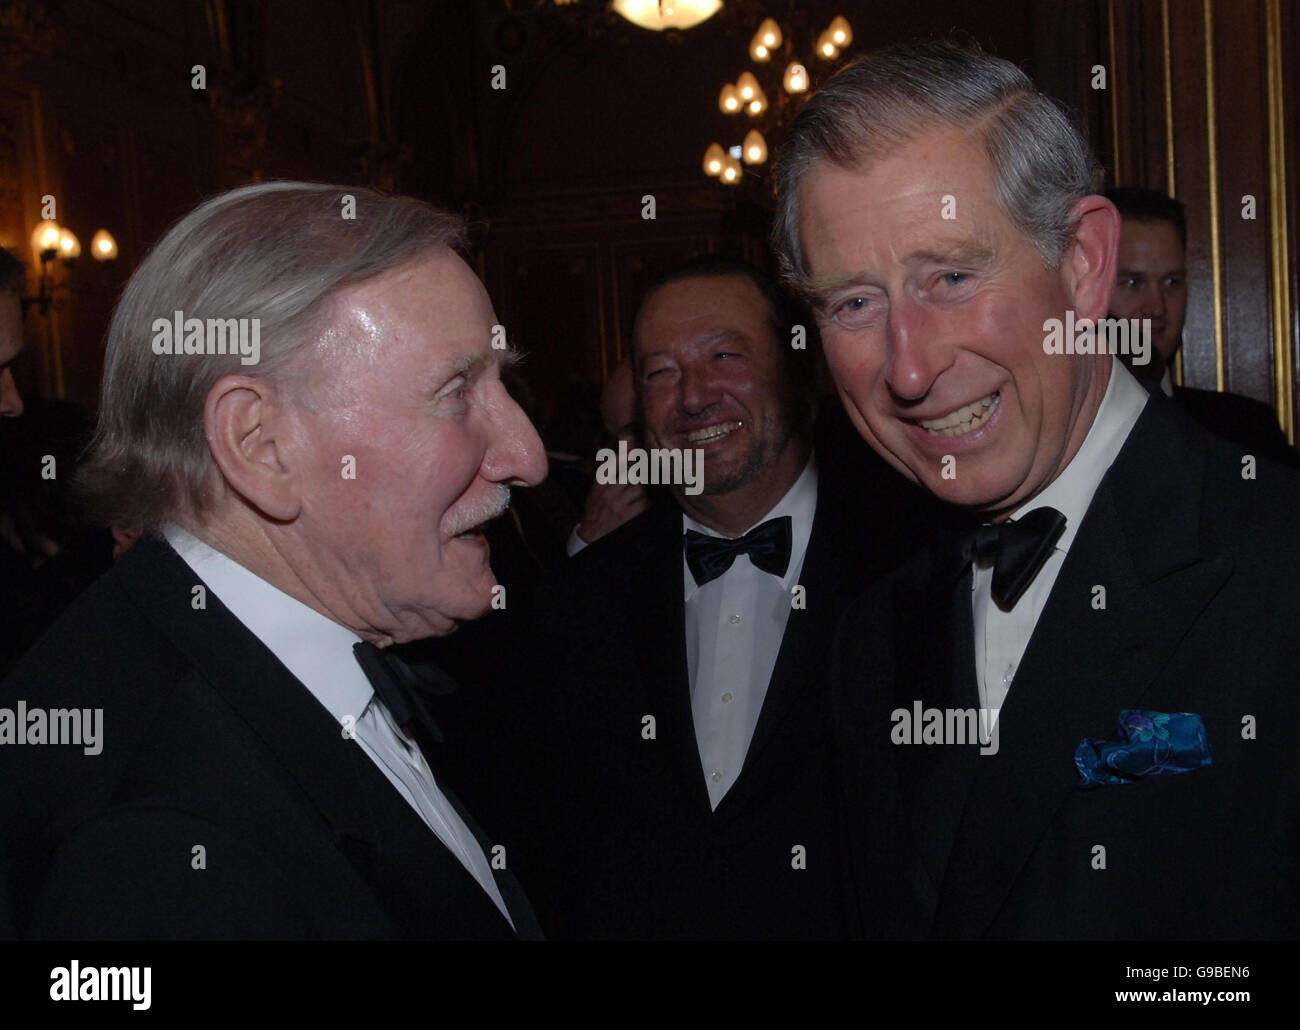 The Prince of Wales chats with actor Leslie Phillips at the Royal Shakespeare Company's gala fund raising dinner for their 'Complete Works Festival', in London. Stock Photo